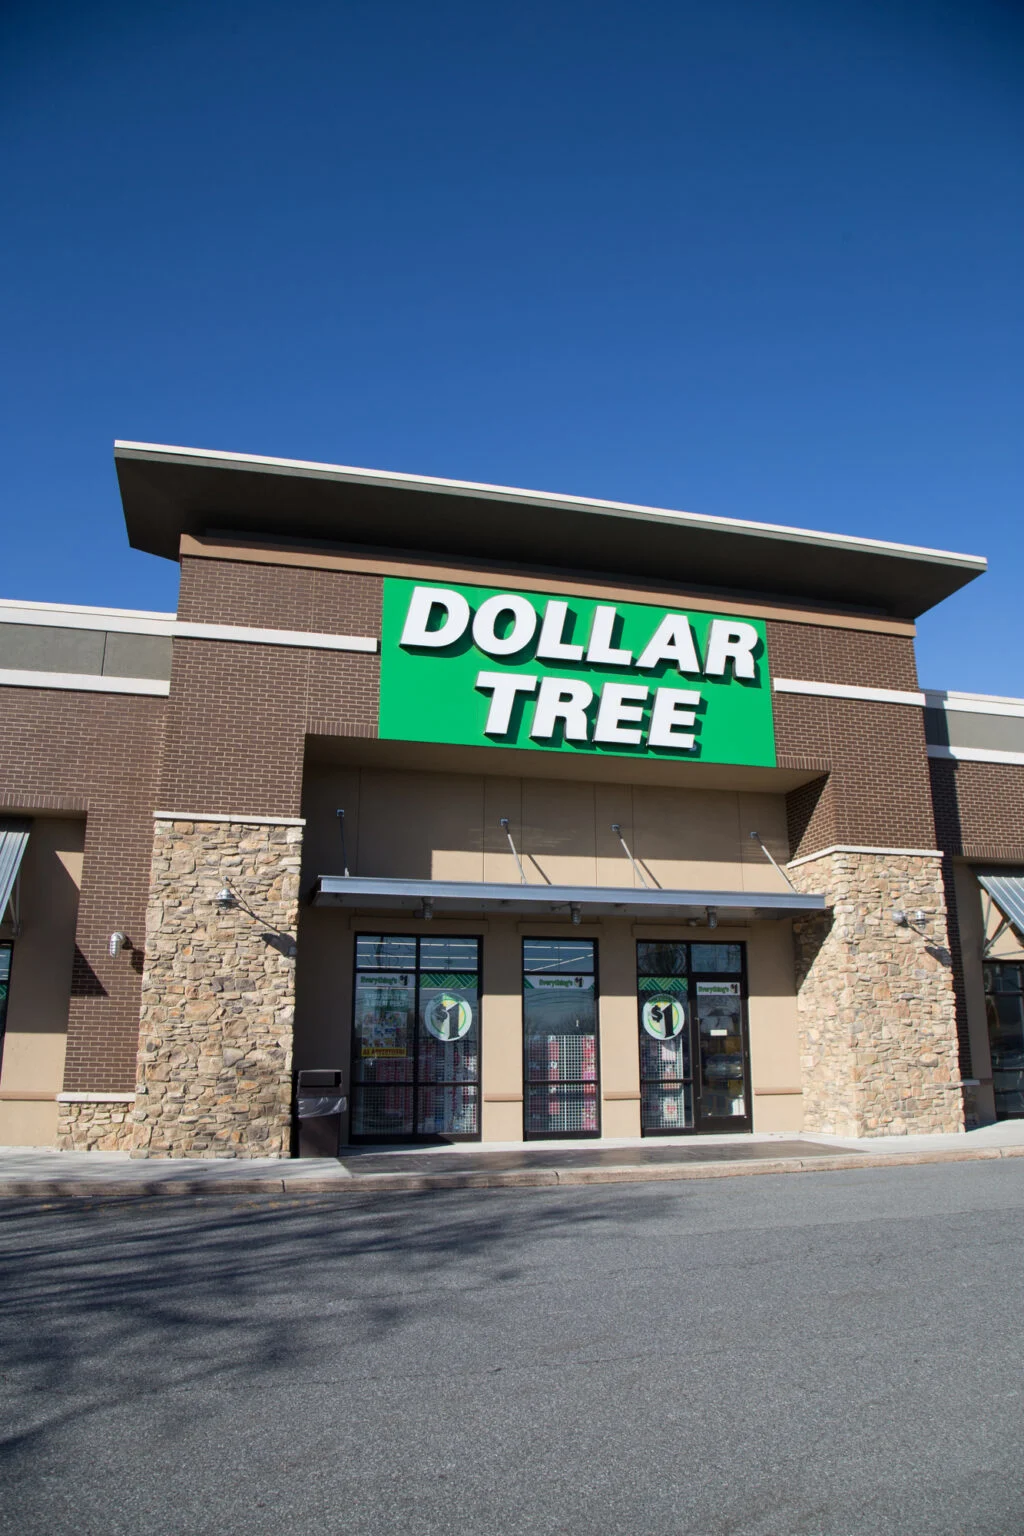 Here's 5 Dollar Tree Items That Are Worth Buying Now Ahead of The Holidays  – Simplistically Living